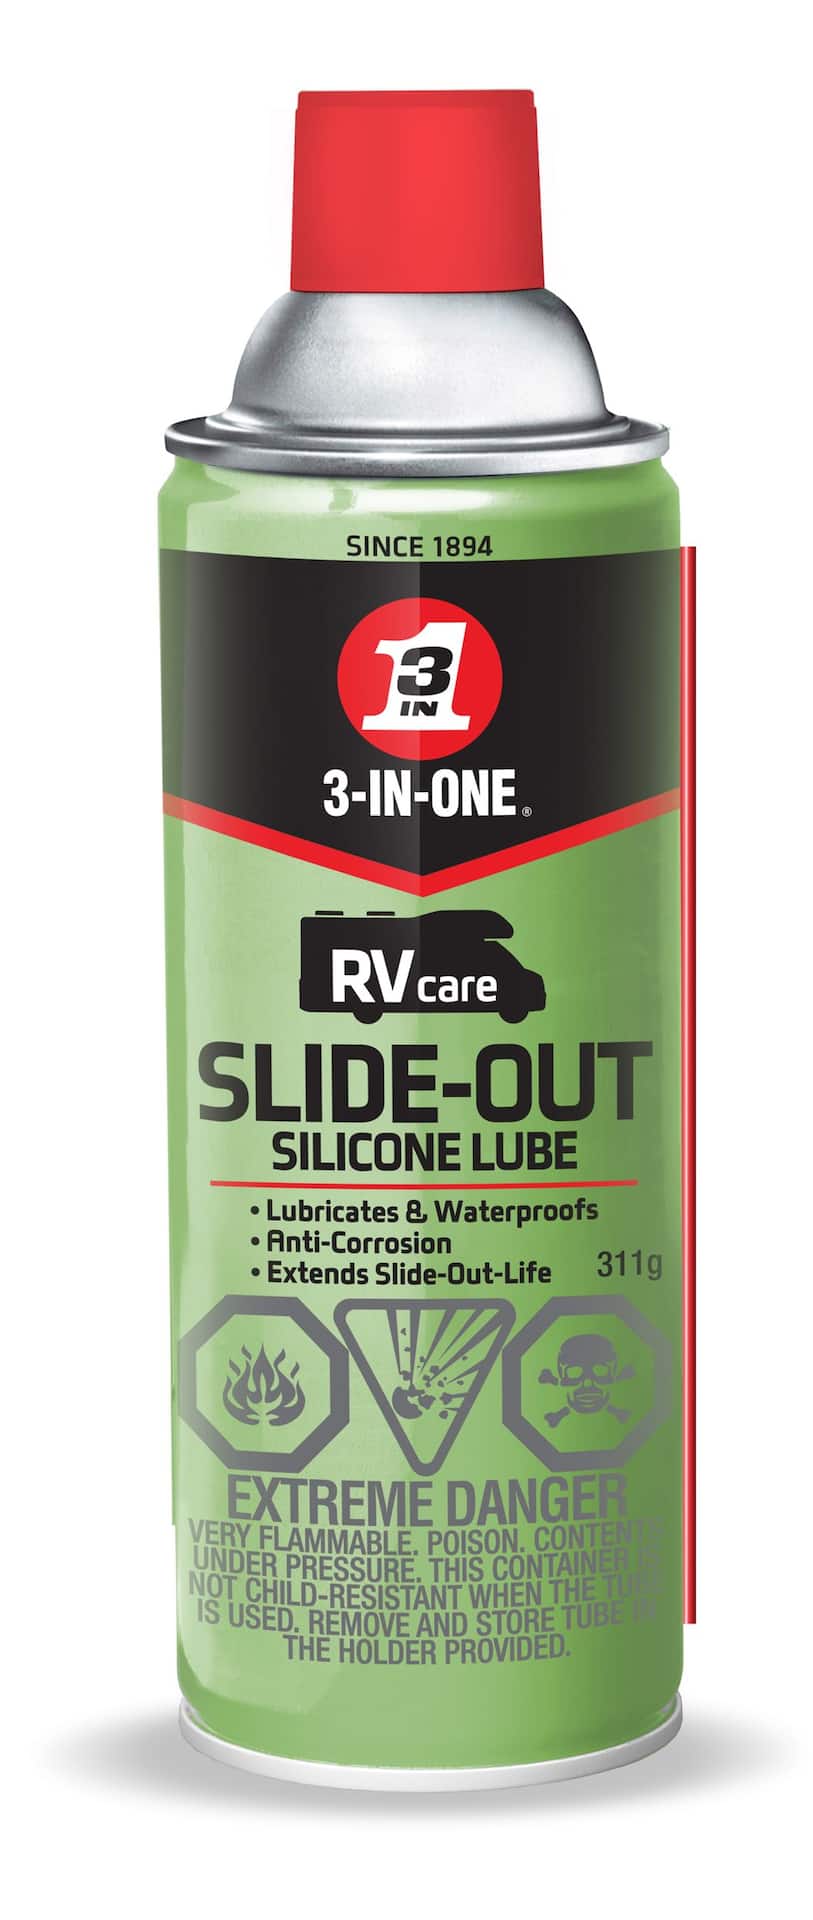 WD-40 RVcare 3-in-1 Waterproof RV Slide-Out Silicone Lube, 311-g